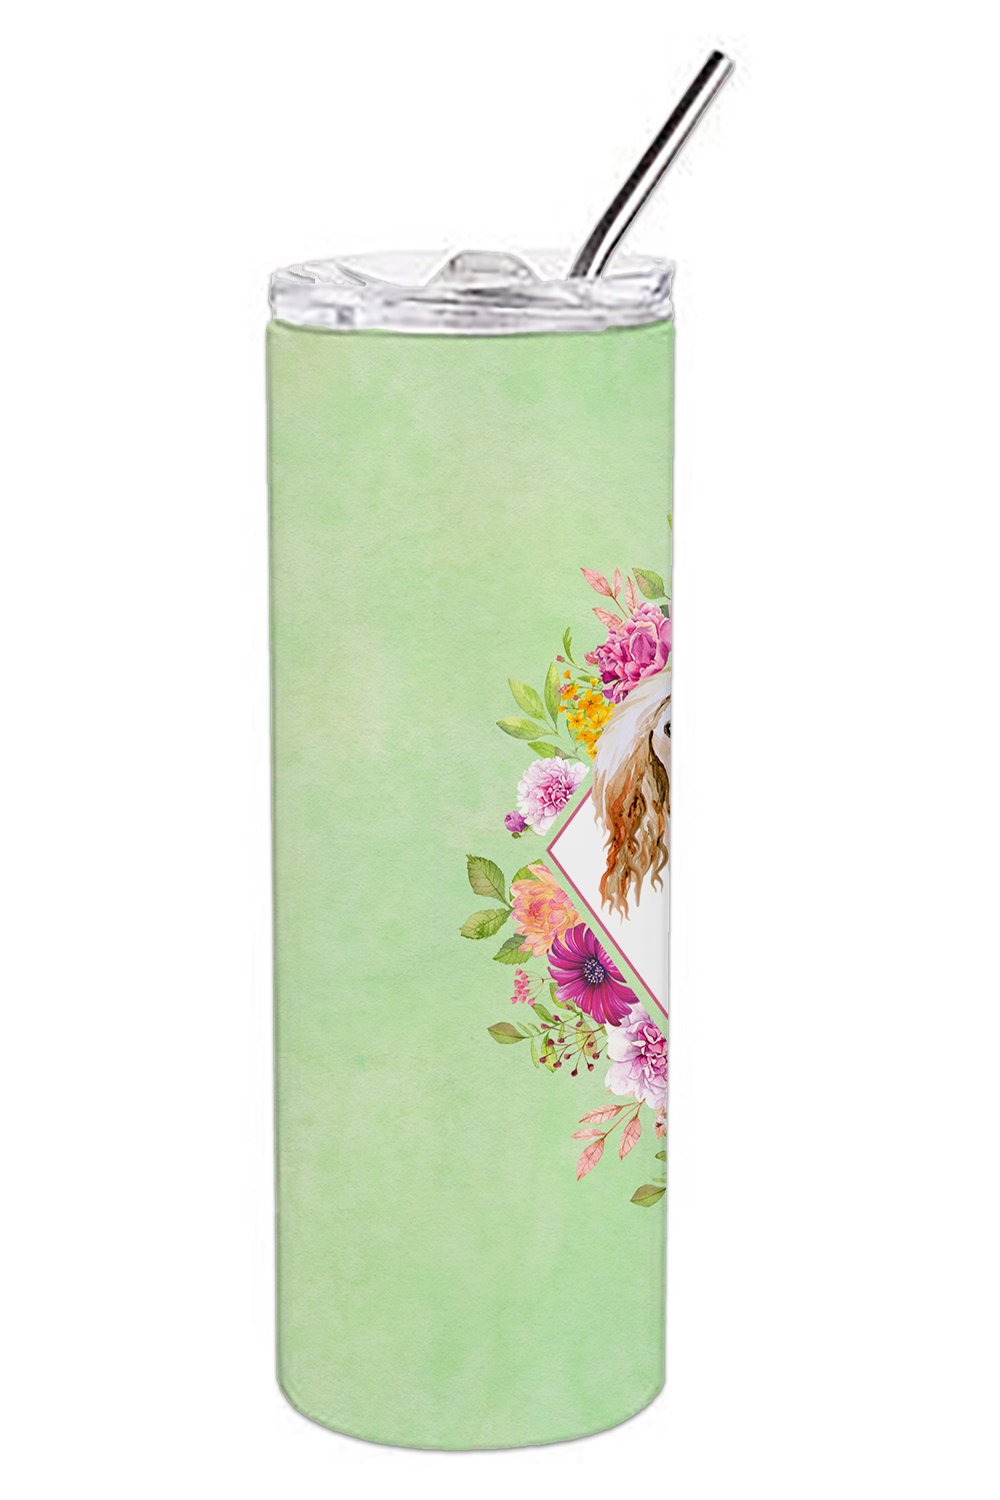 Afghan Hound Green Flowers Double Walled Stainless Steel 20 oz Skinny Tumbler CK4270TBL20 by Caroline's Treasures